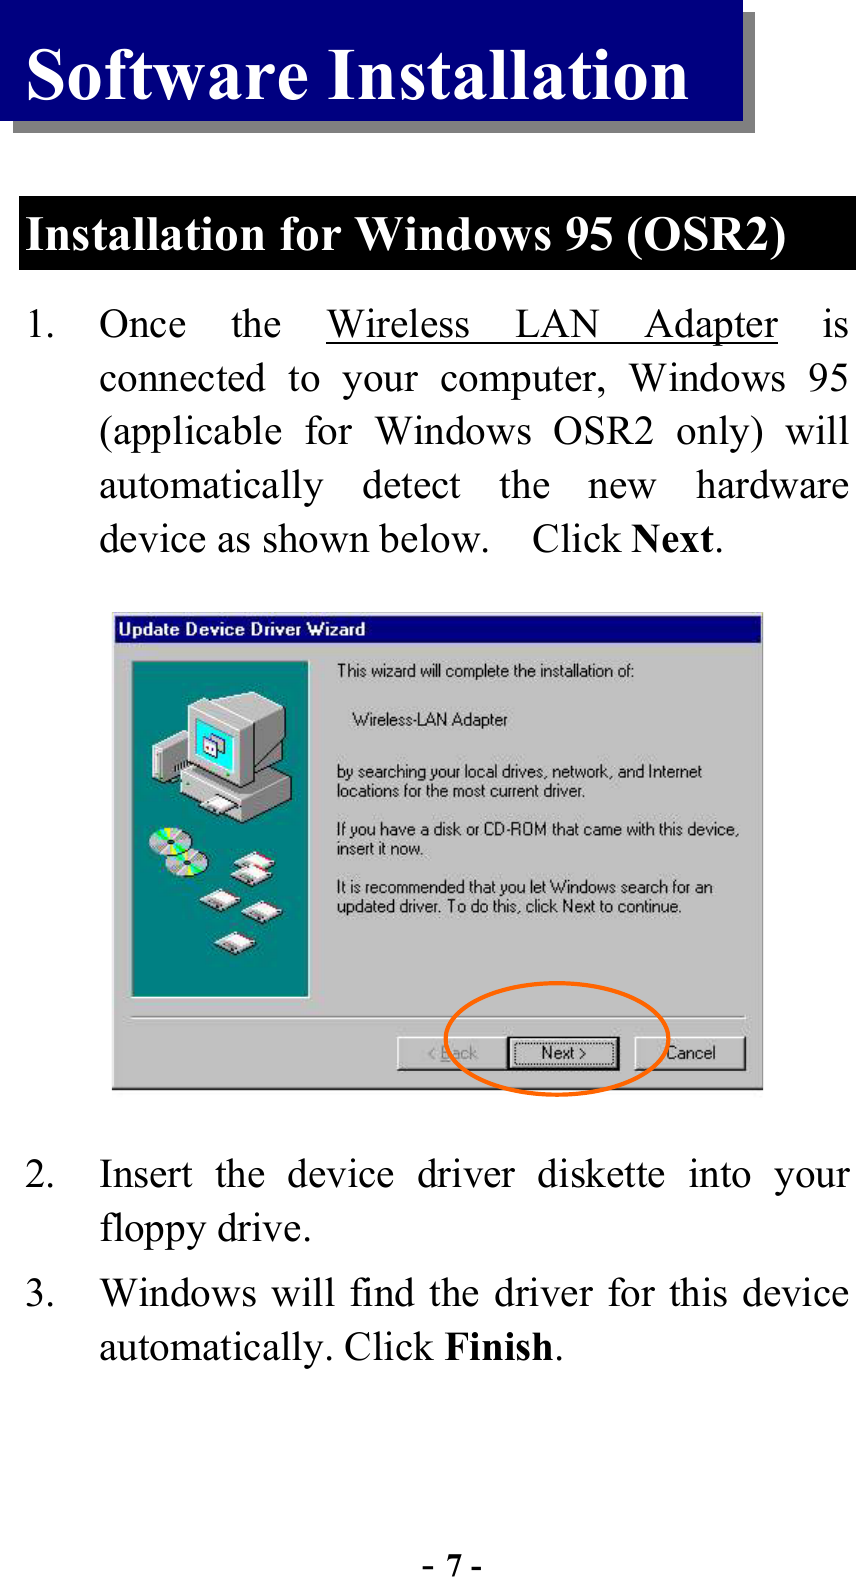  - 7 - Software Installation  Installation for Windows 95 (OSR2) 1. Once the Wireless LAN Adapter is connected to your computer, Windows 95 (applicable for Windows OSR2 only) will automatically detect the new hardware device as shown below.    Click Next.  2.  Insert the device driver diskette into your floppy drive.   3.  Windows will find the driver for this device automatically. Click Finish.  